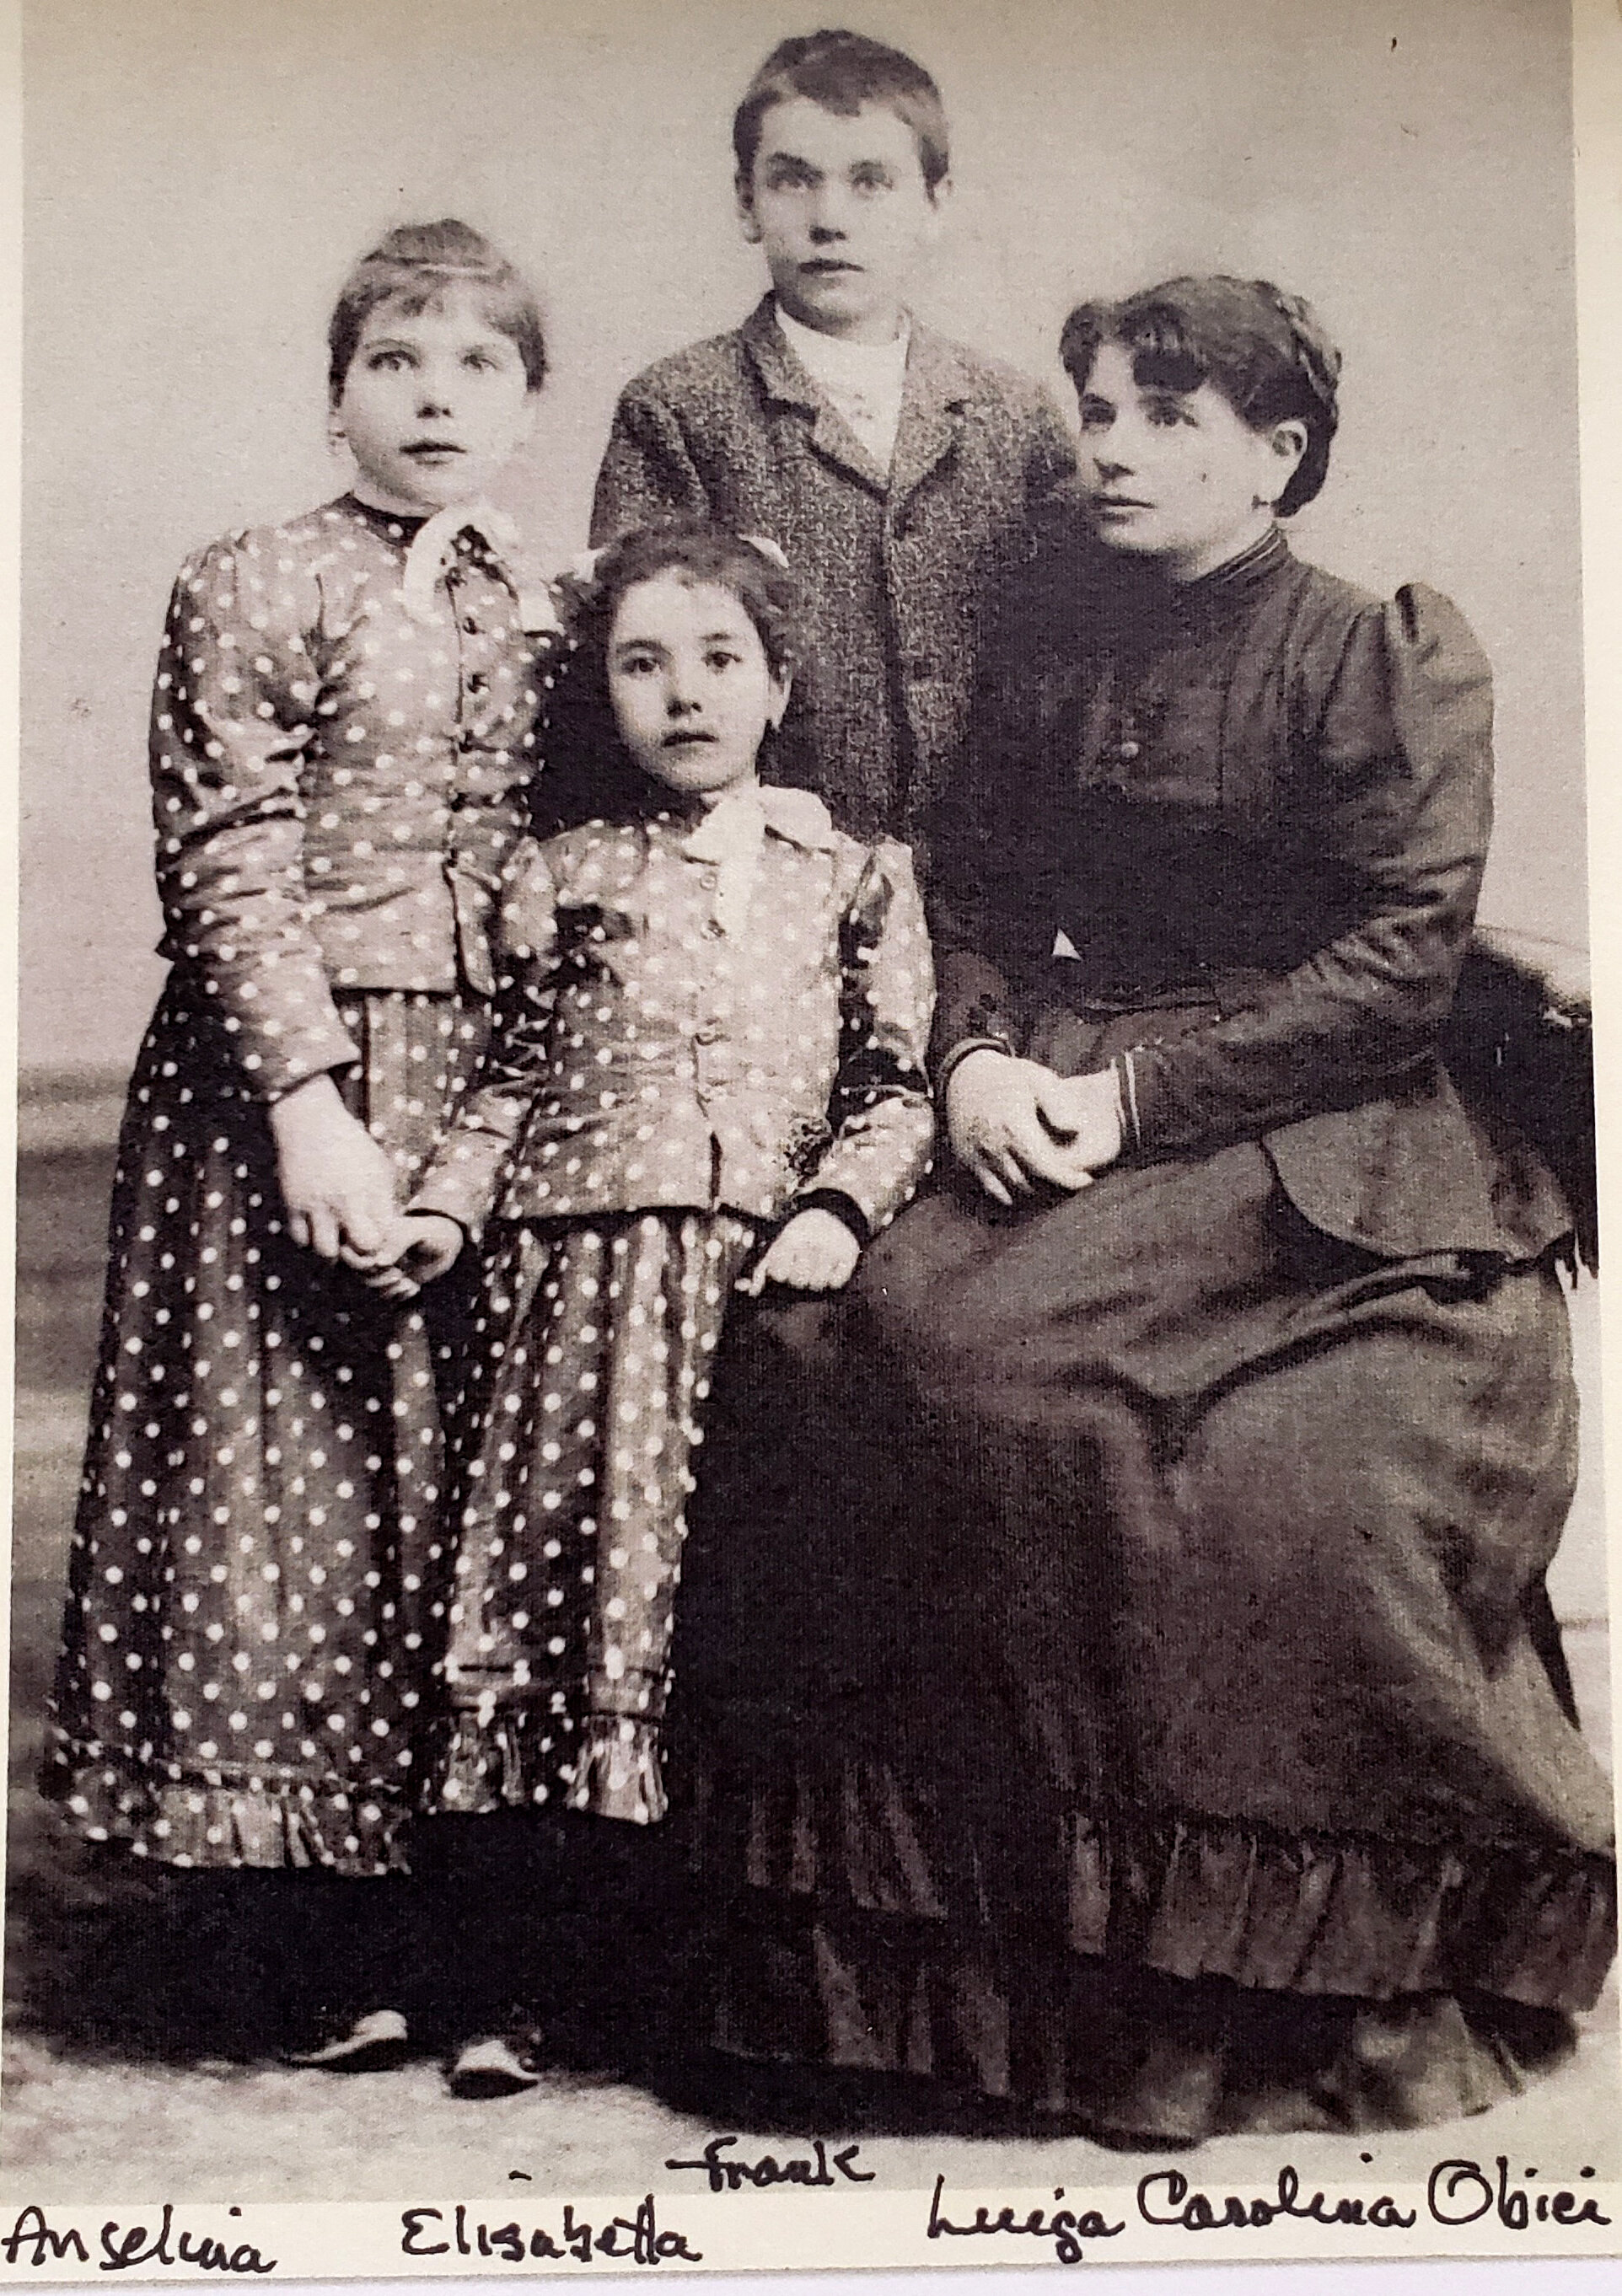 Elizabeth, Angelina, Frank and their mother taken after Amedeo left Italy